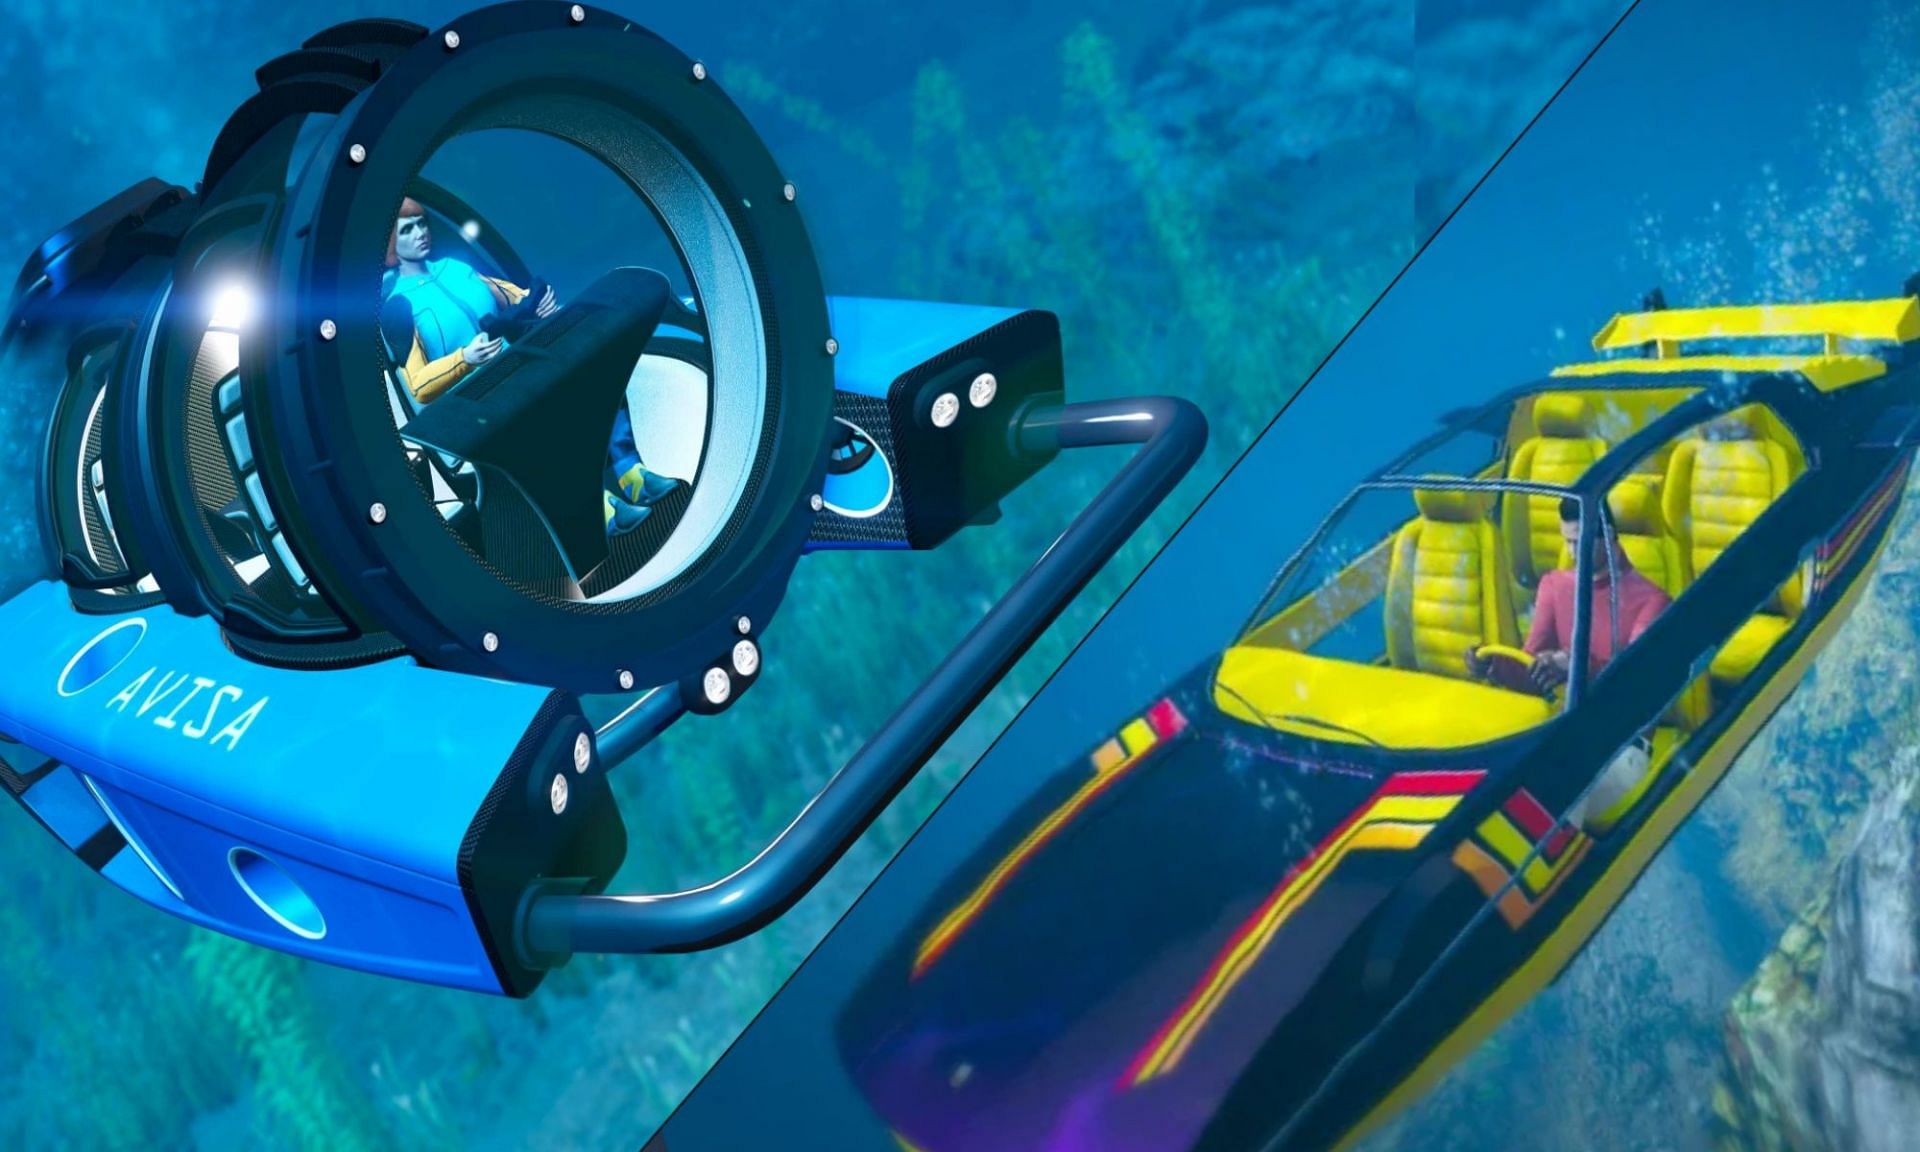 These vehicles are perfect for underwater exploration